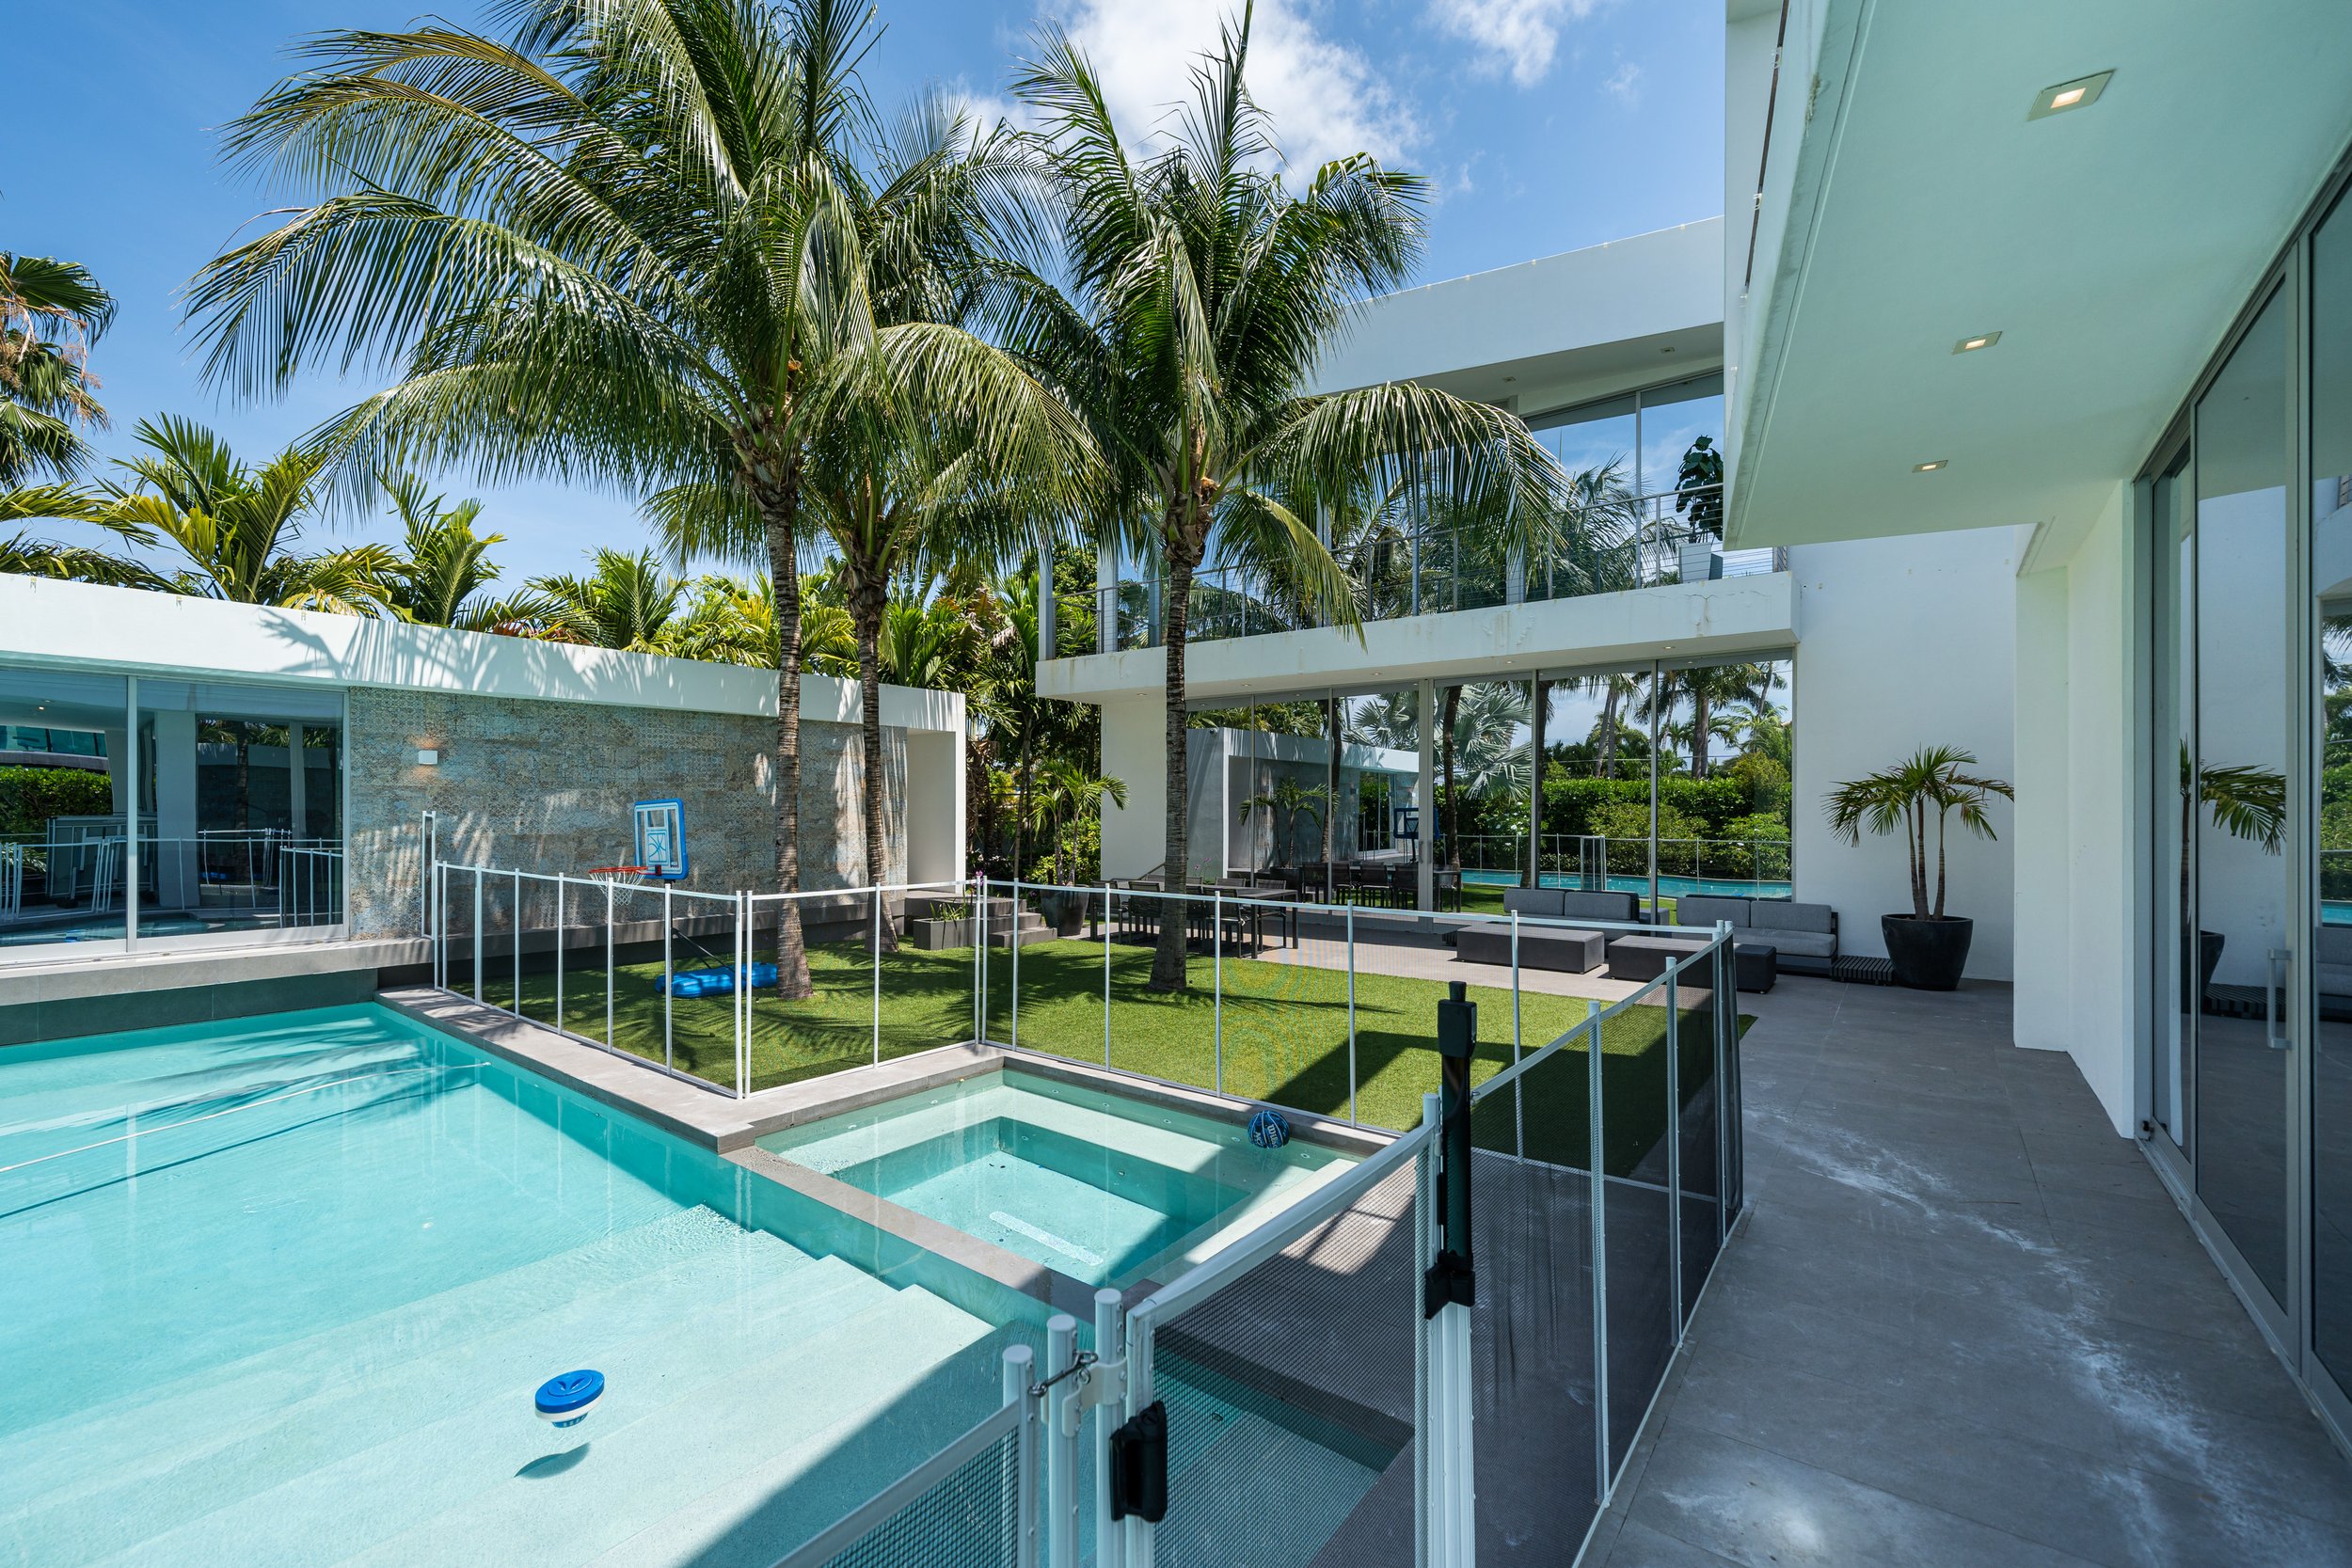 Miami Heat Star Victor Oladipo Lists Hibiscus Island Contemporary For $10 Million Amidst NBA Finals 13.jpg